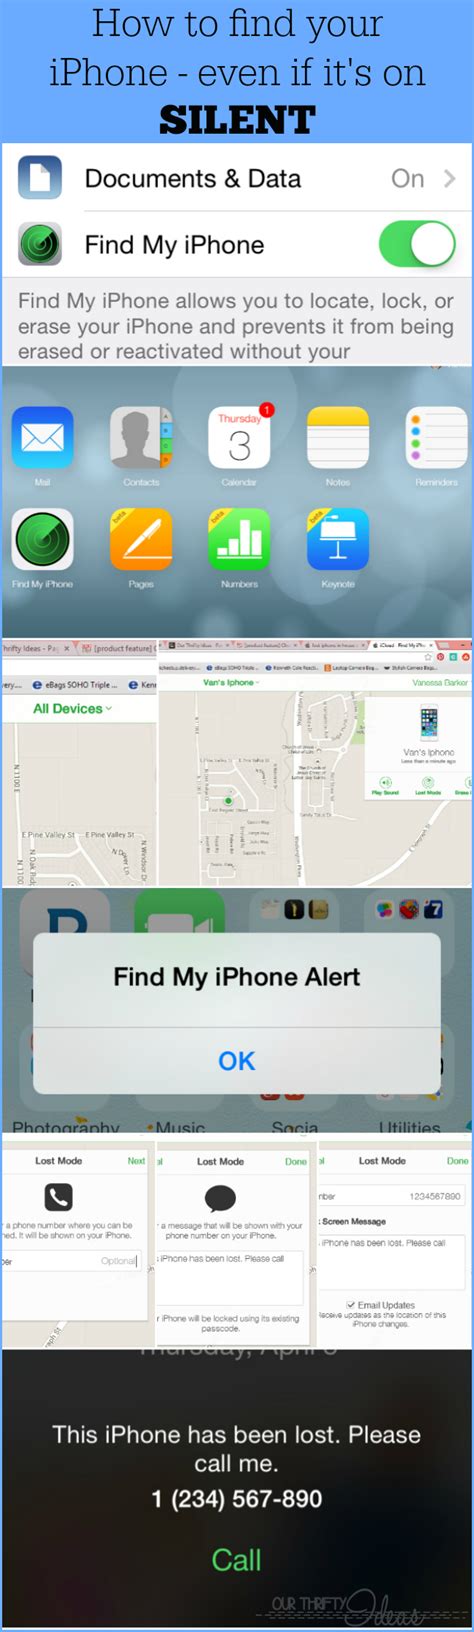 Find Your Lost Iphone Even When Its On Silent And Lost In Your Home